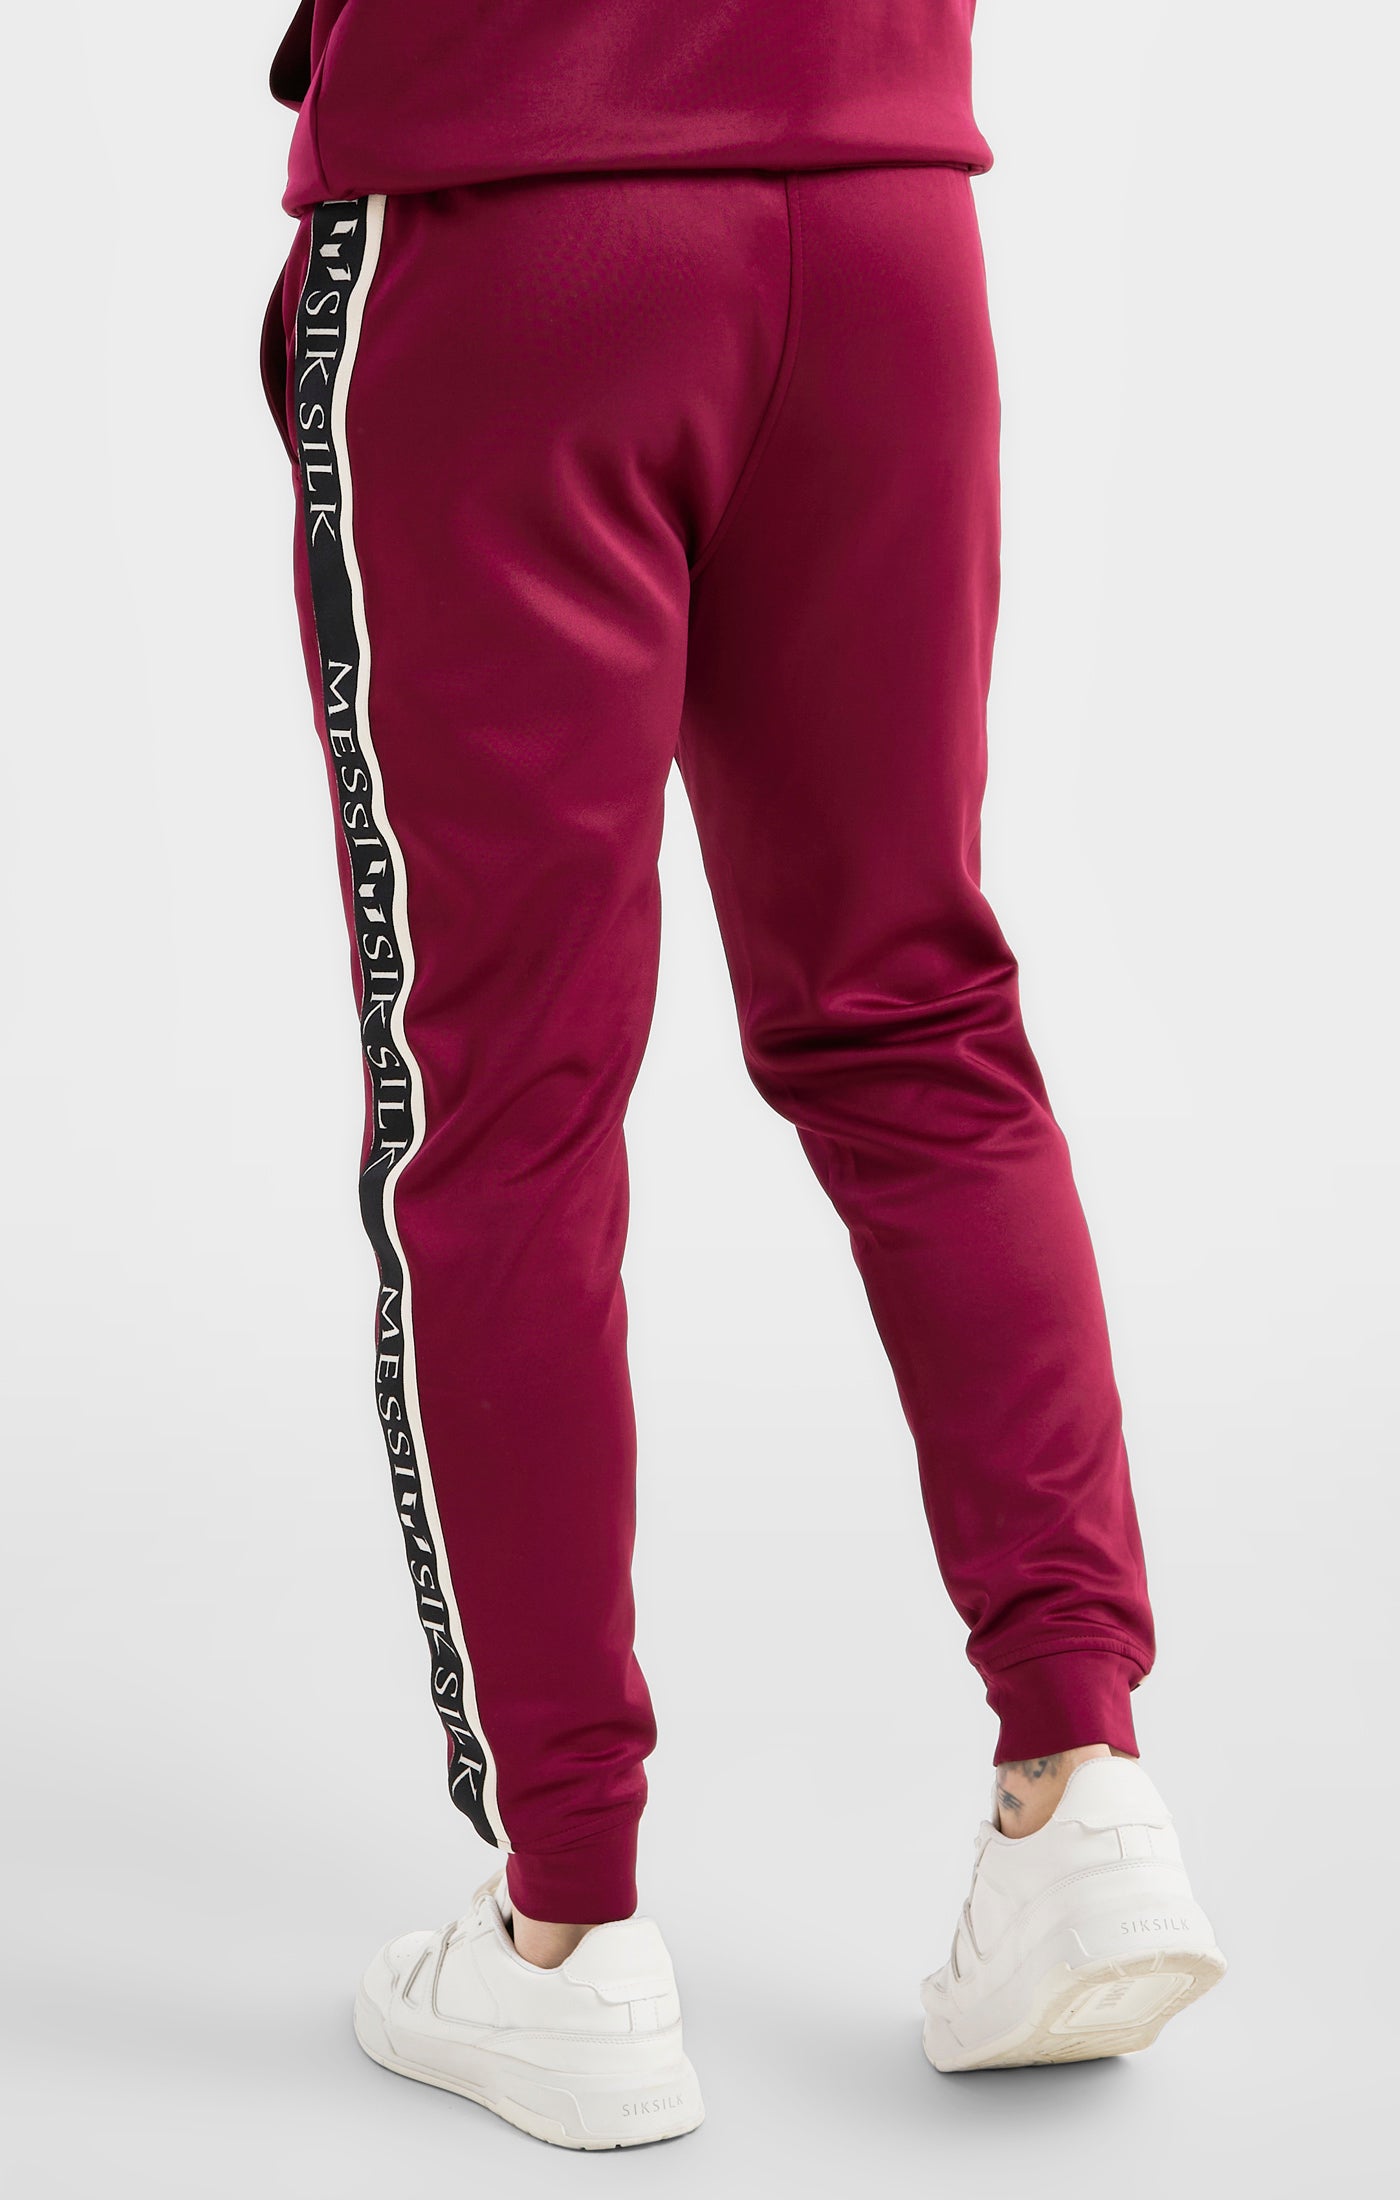 Load image into Gallery viewer, Messi x SikSilk Taped Pant - Burgundy (3)